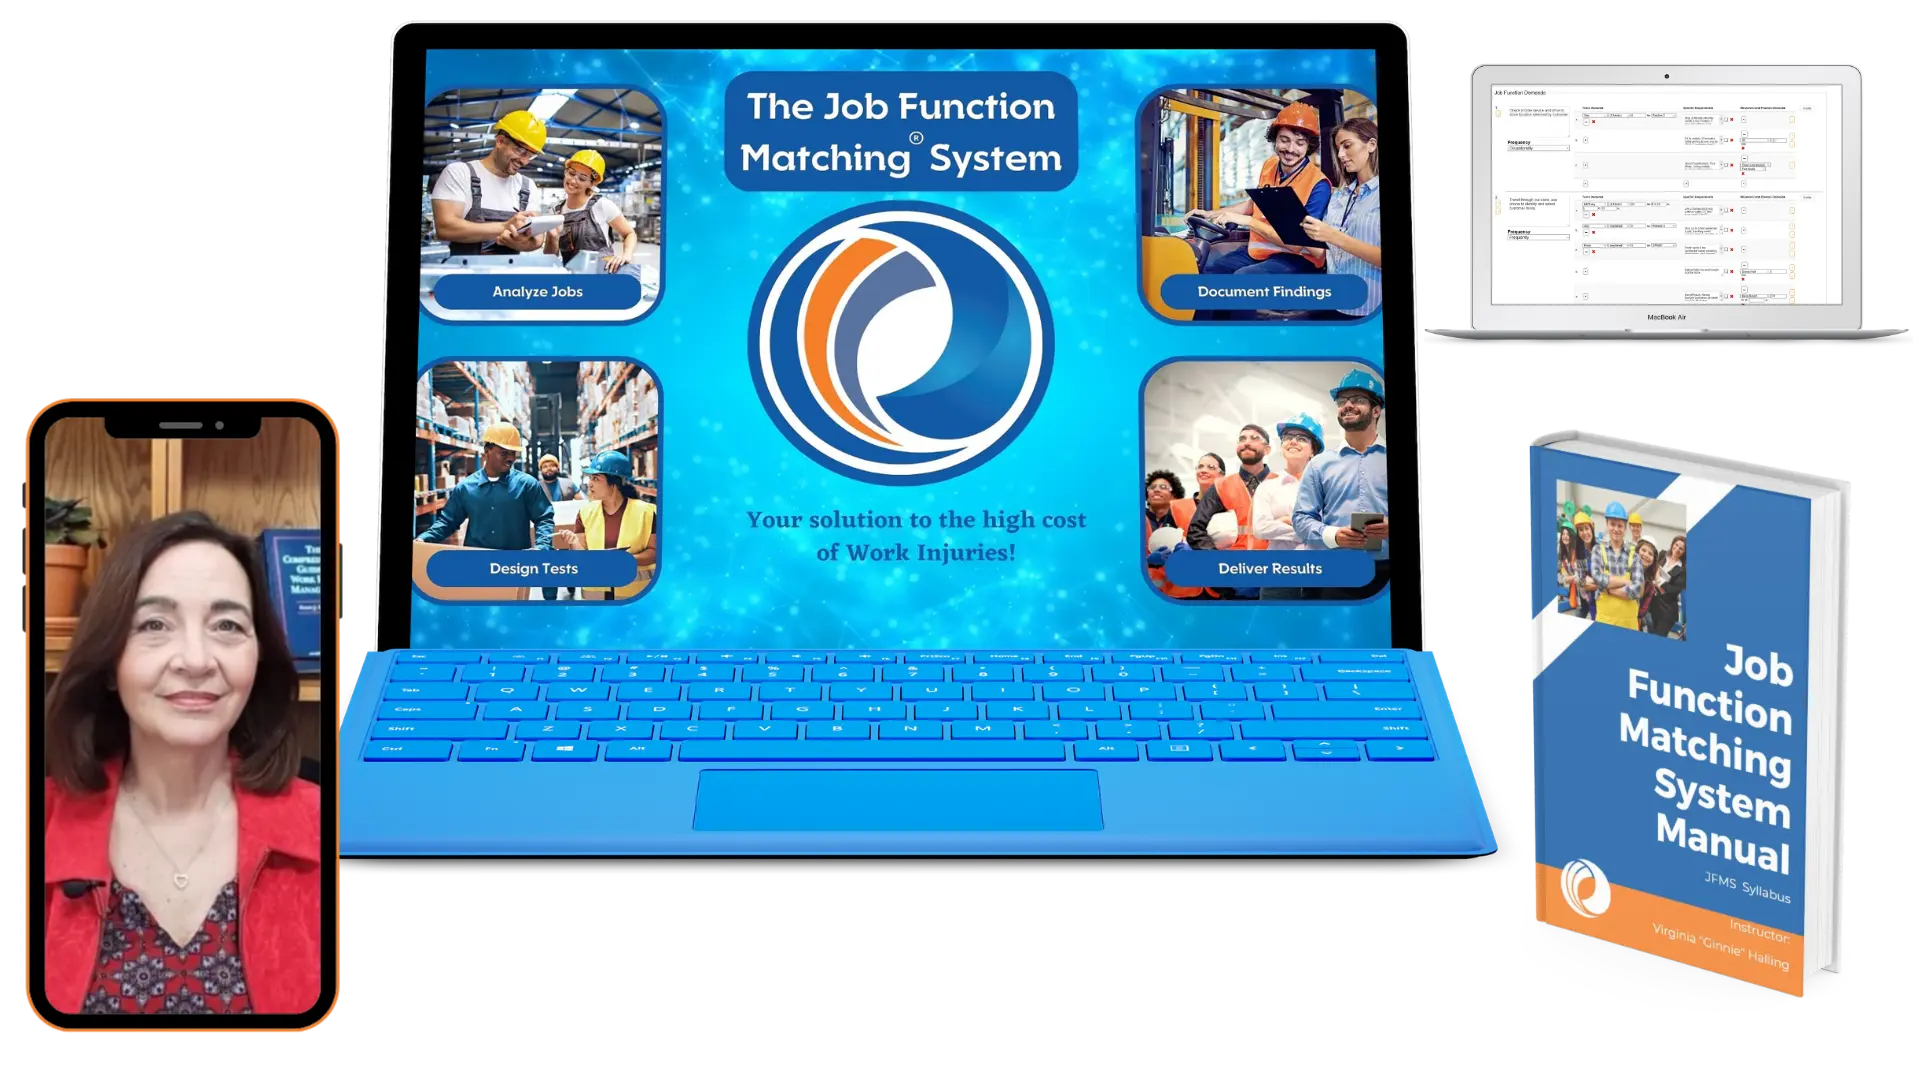 The Job Function Matching System Independent Learning is displayed on a laptop next to the Job Function Matching System Manual and the JFM Software and an image on a cell phone of Ginnie Marshall who is remote consulting